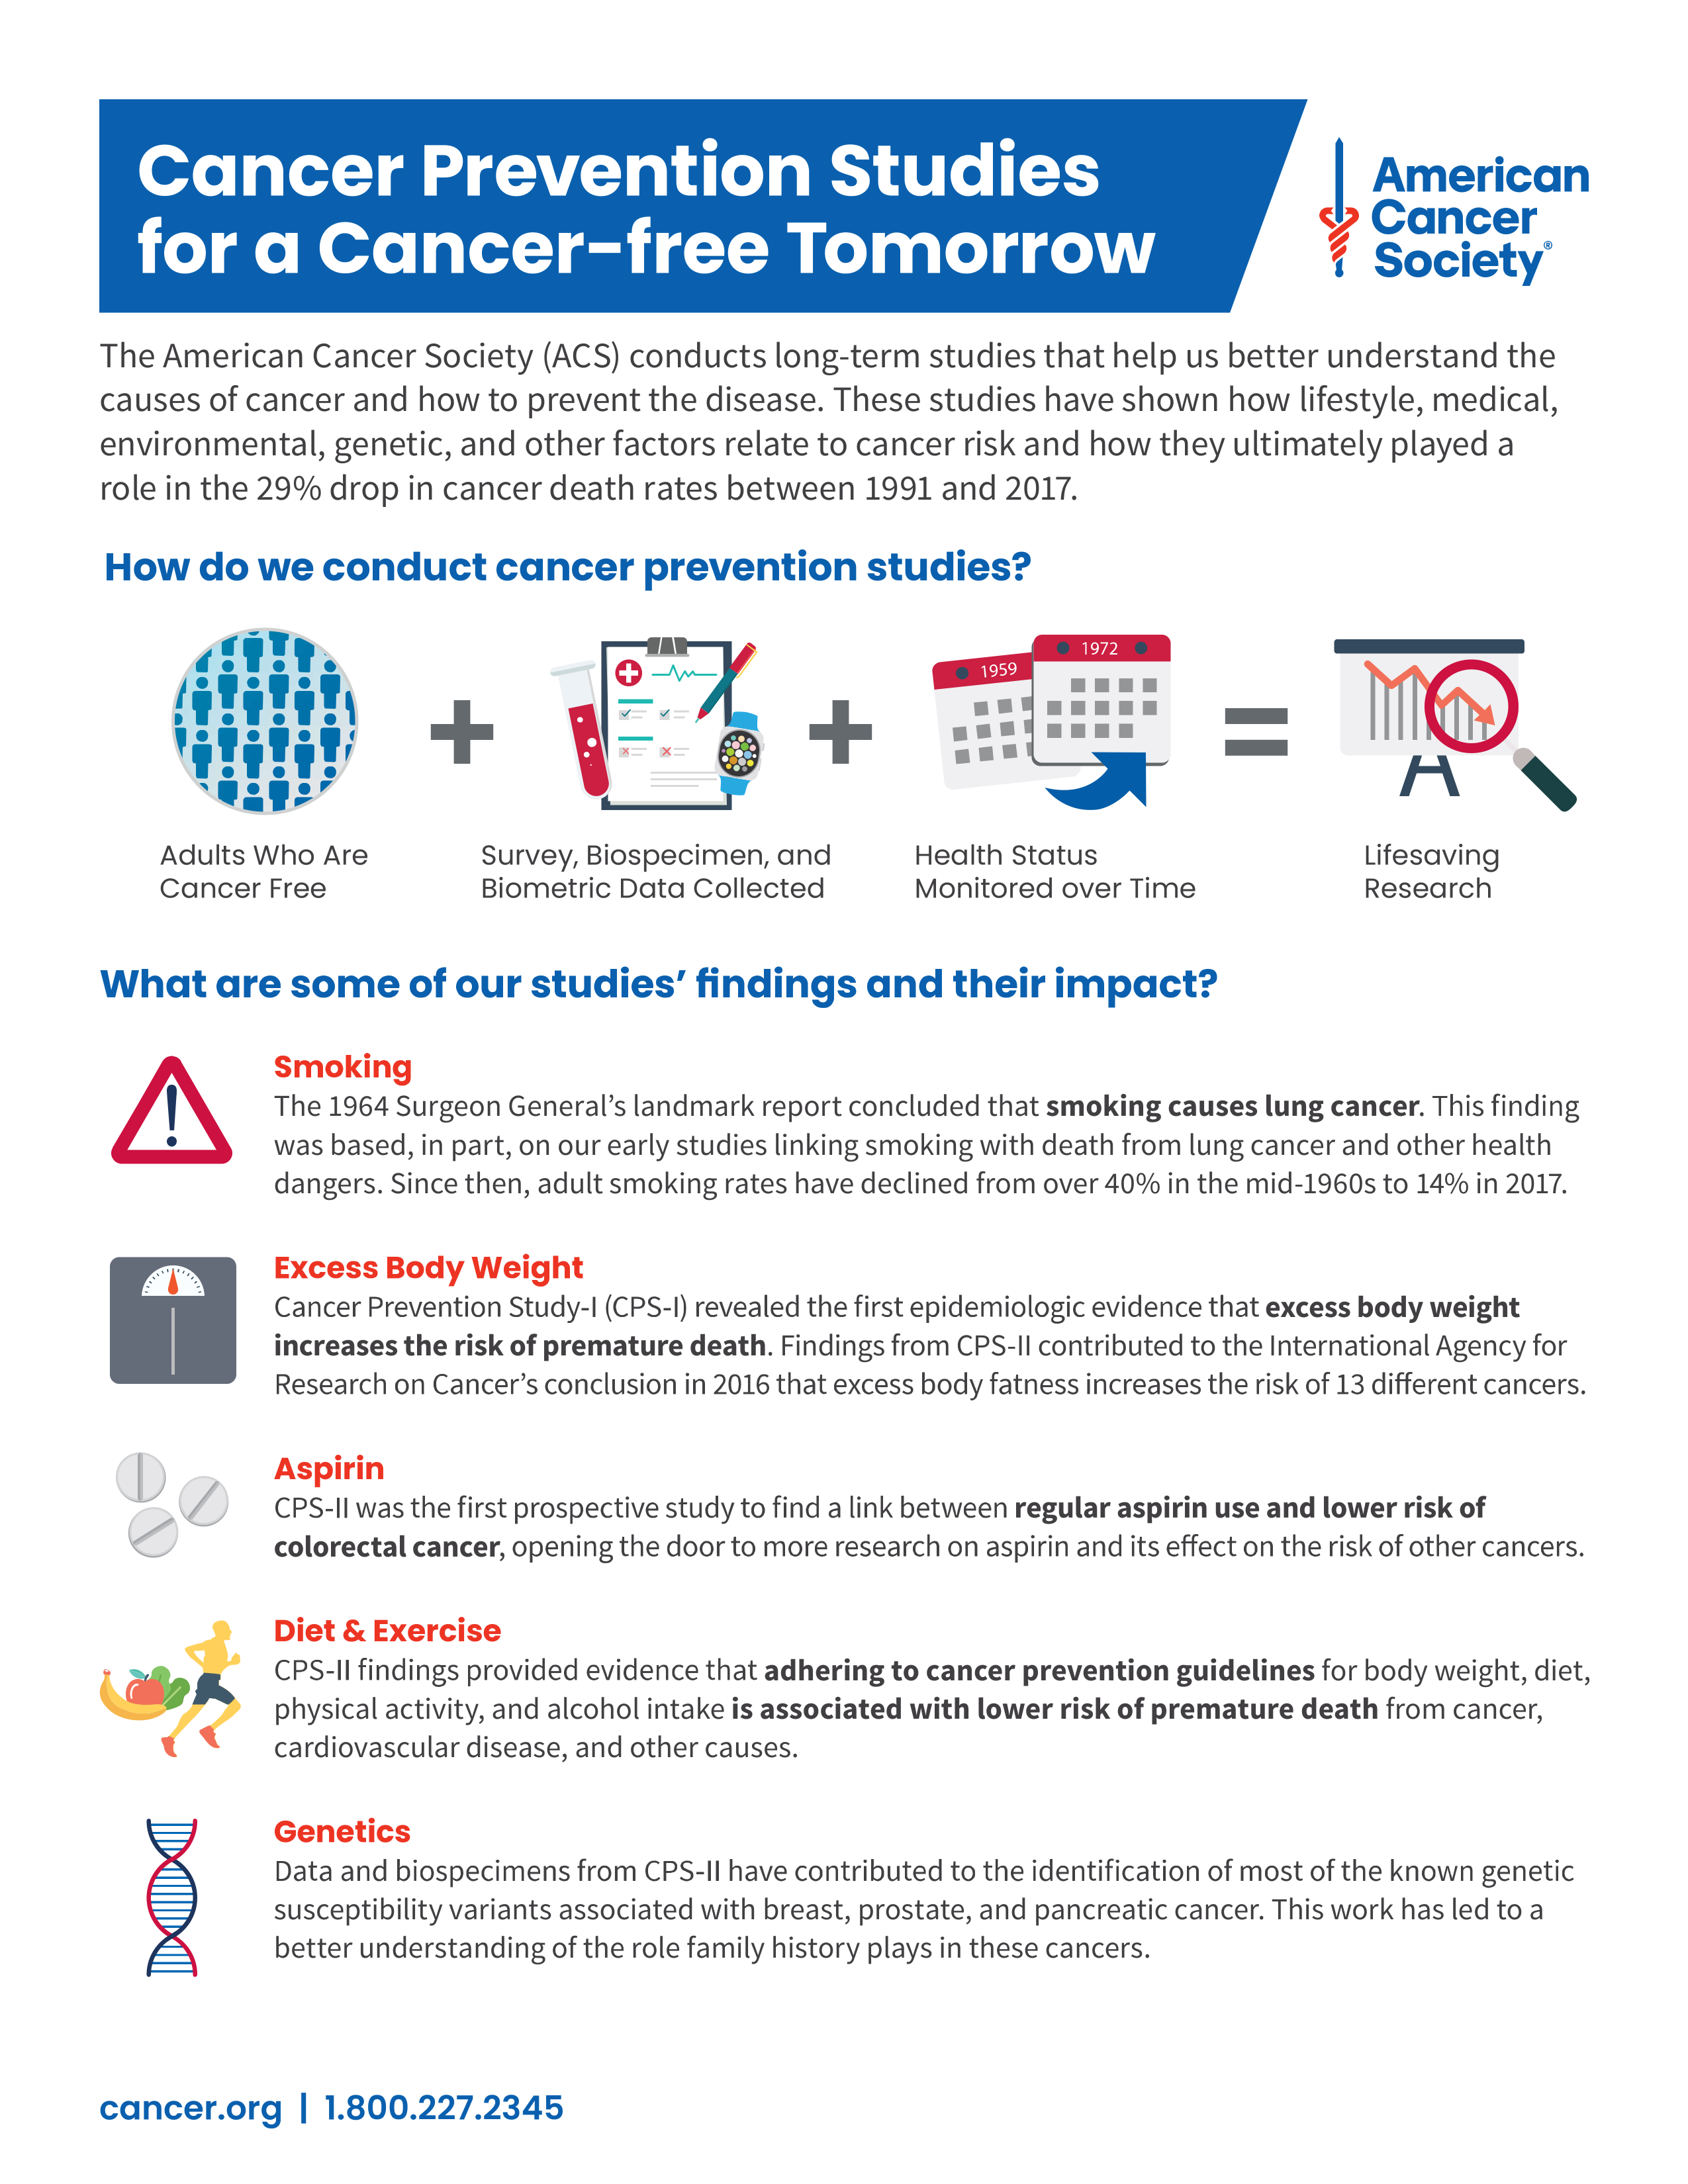 Page 1 of the 2023 Cancer Prevention Studies Infographic